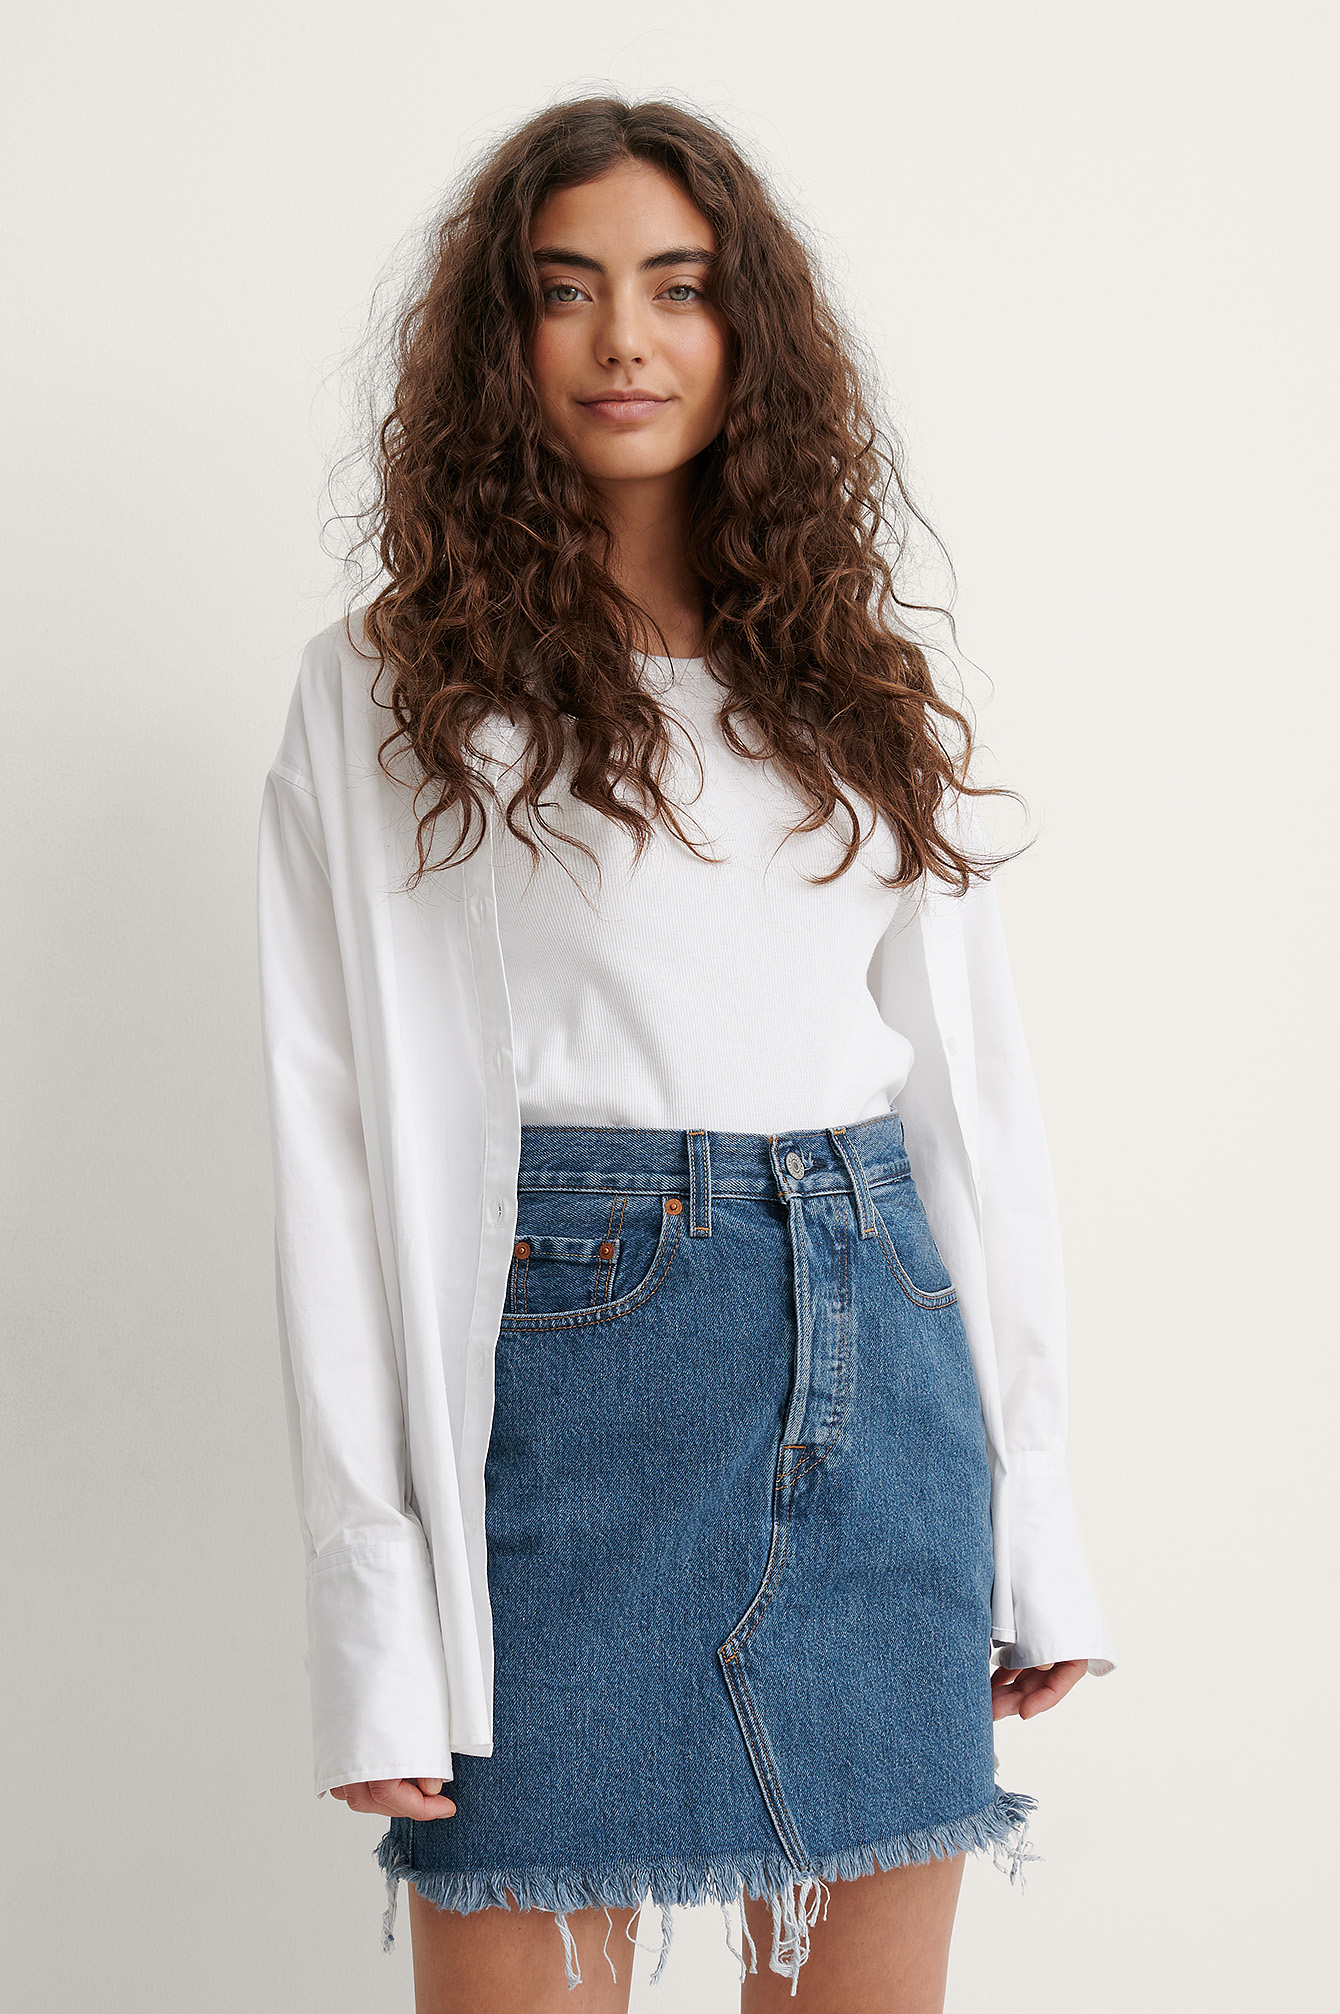 Meet In The Middle Iconic Bf Skirt